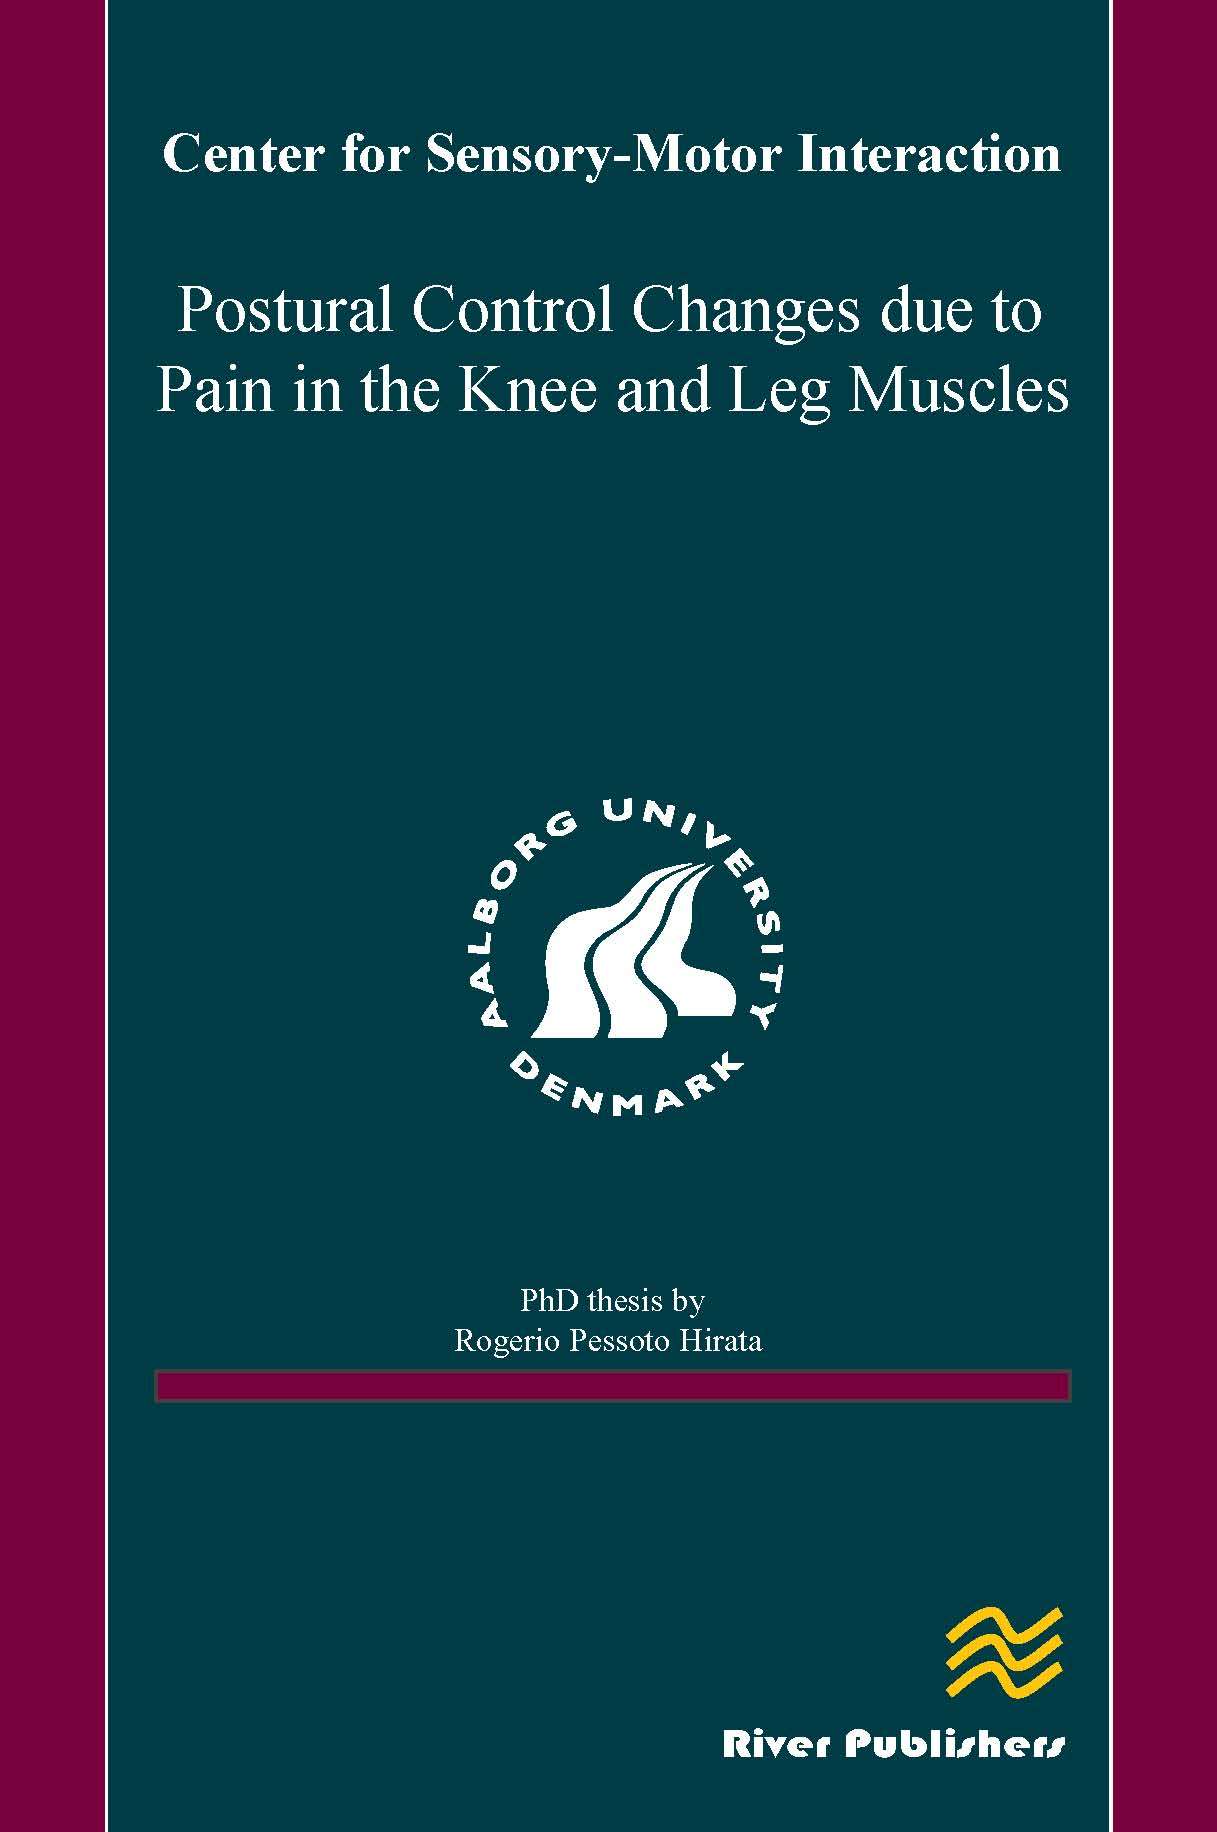 Postural Control Changes Due to Pain in the Knee and Leg Muscles